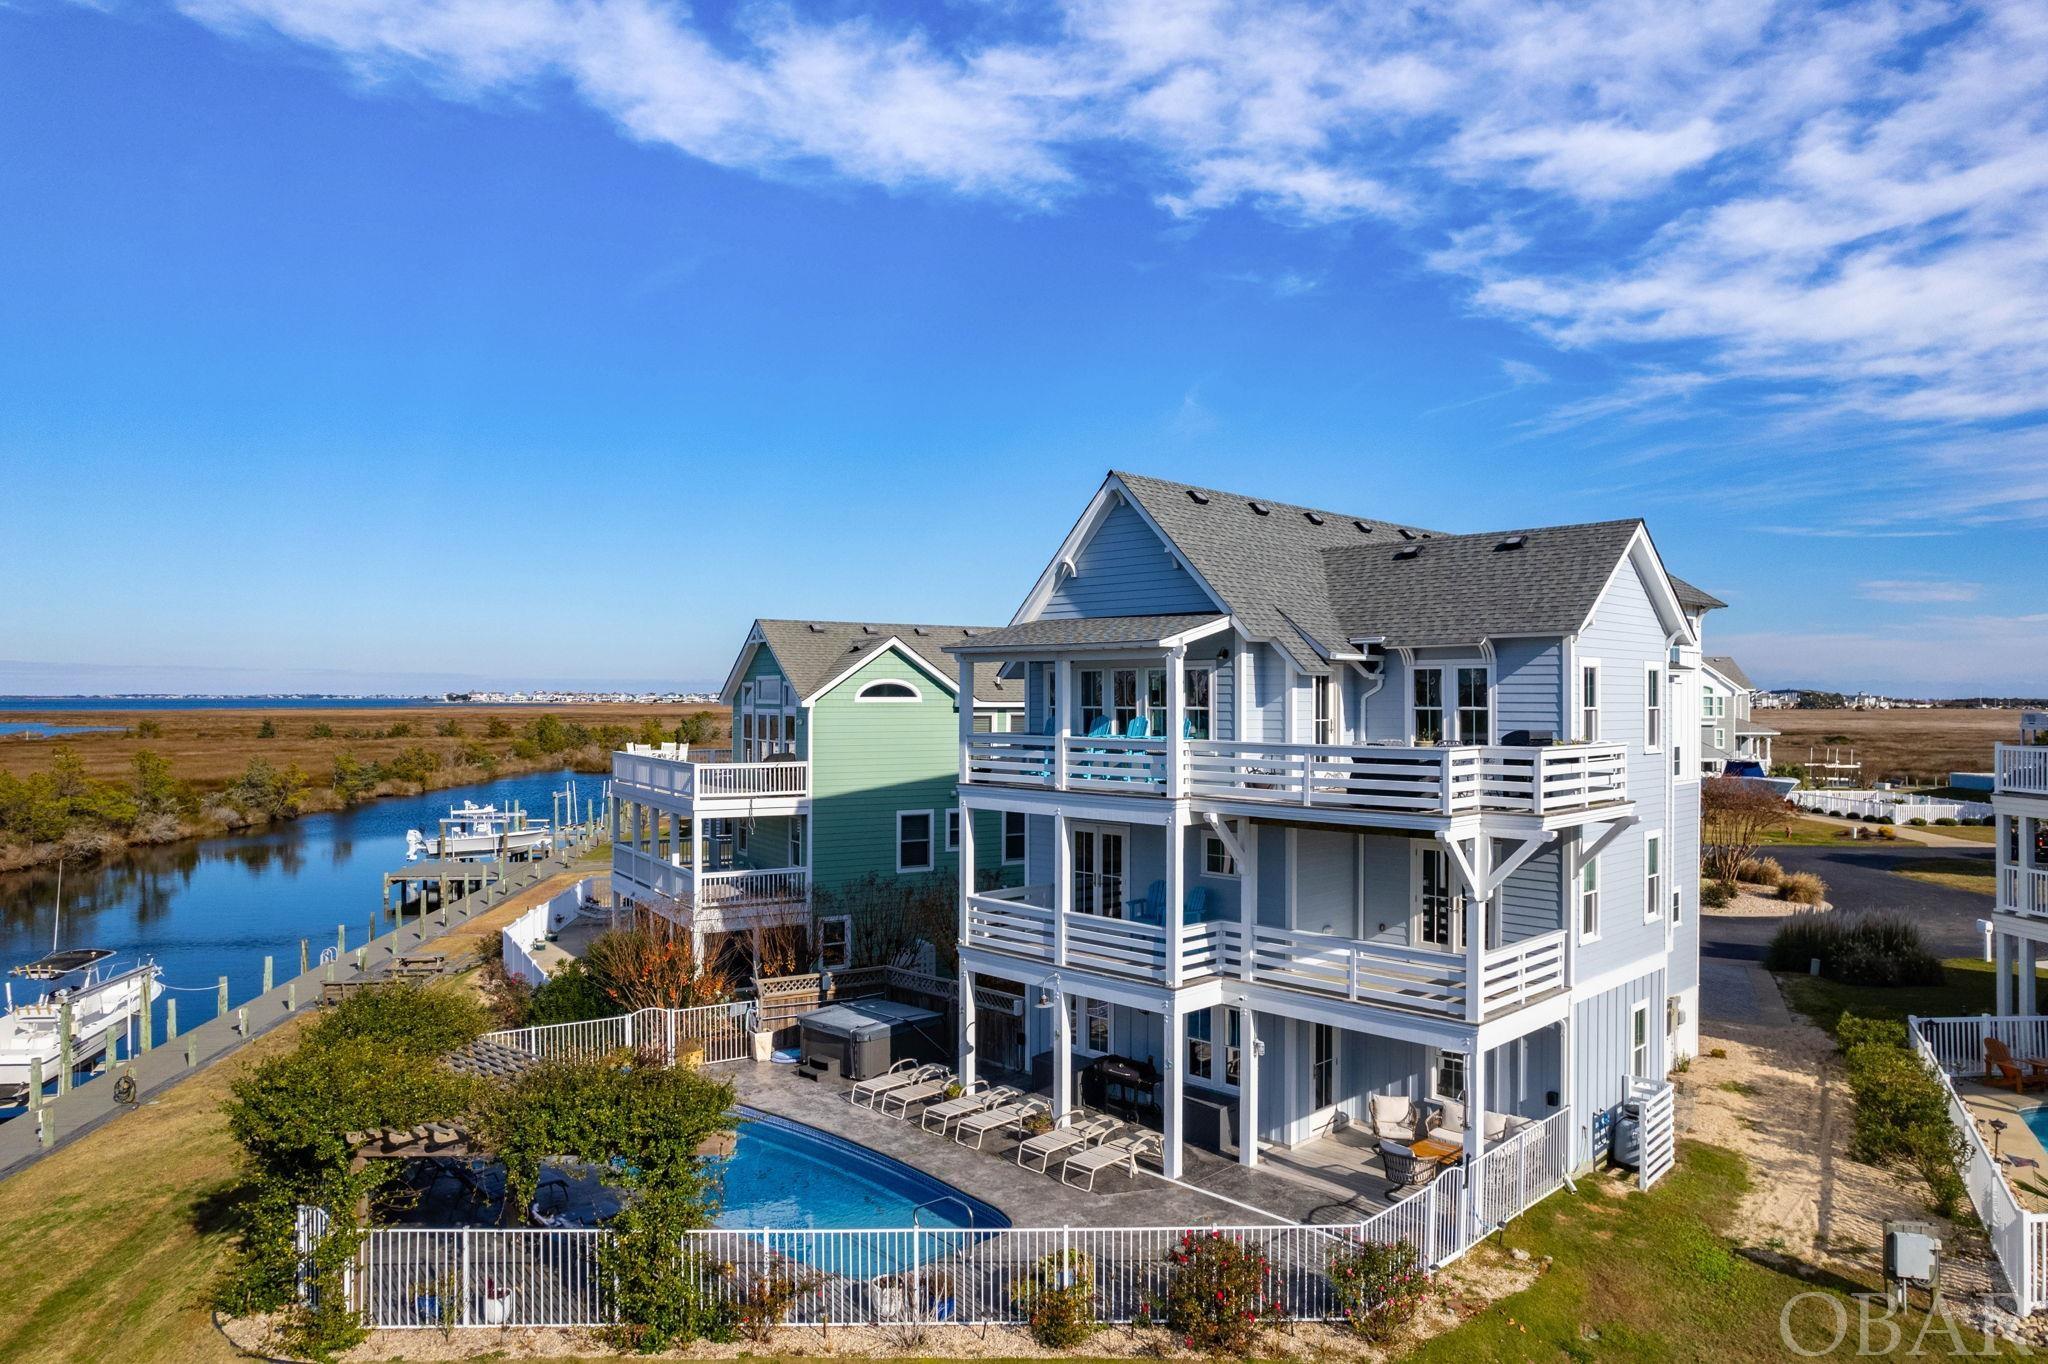 100 Sunset Ct. is the epitome of all things Coastal! The location is certainly coastal, as it’s located in the small waterfront community of the Peninsula in Manteo, NC. There’s 140ft. of deep-water bulkheaded canal available at your back door to dock your boat/boats/jet skis/ pontoon or kayaks! The bulkheaded walkway encircles the community and offers access to the navigable Shallowbag Bay channel connecting the Roanoke Sound and Pamlico Sound through the Oregon Inlet to the Atlantic Ocean.  The home was designed by Michael York of The Coastal Cottage Co.  Sitting atop a high lot, there are terrific views of the canal, the sound and marsh so that morning, noon and sunset time, you’re surrounded by brilliant blues of sky and water or cloud colors indicative of the boating weather for the next day. This home has immediate curb appeal from the driveway pavers to the cottage architecture.   A beautiful custom front door and sidelights allow light into the welcoming foyer providing privacy and light to the mid-level where you’ll find Eddie Bauer engineered hardwood floors, coastal trim and details all round. In the hallway, there’s an elevator, closet and laundry with washer/ dryer and an extra freezer for your “catch of the day”.This functional space is neatly disguised by sliding barn door for easy access. There are 3 bedrooms on this level, all with balcony/deck access. There’s a primary bedroom on the north west with a generous closet and large, private bath. The double vanity with the glass vessel sinks is flanked on one end with a private water closet on one side and a large walk-in tiled shower with transom window, built in seating and shower heads on the other. A linen closet completes the picture. There are two other bedrooms on this level which are connected by a Jack and Jill bath with 2 separate/private vanities with vessel sinks, bench seating as well as separate closets for each. The linen closet holds everything you need for enjoying the large walk-in tiled shower with a transom window. The two bedrooms on the north side have canal views and the bedroom on the south looks out across the community to the sound beyond . Take the elevator up to an open concept top floor with vaulted ceilings and hand crafted beams. The spacious kitchen has room for more than one cook or separate prep areas with more cabinet spaces than you could ask for. The 48”gas cook top with pot filler, double electric oven, dishwasher, wine cooler are all connected by leathered granite countertop and has ample seating all round for those who like to watch the cook and get first dibs on the feast. The light fixtures in this area are made from Handcrafted California wine barrel rings. Gather around the gas fireplace with a live edged mantle central to the seating area and a generous separate dining area adjacent to the one of the best butler’s pantries you’ve seen in a while. There’s room for a slim extra fridge and it’s all accessed by a sliding barn door. Step out to an open west facing deck where you can see the sound and Jockey’s Ridge to the east or sunsets to the west. There’s also another bedroom on this level which is currently used as an office/sleeping area. The full bath with tile shower makes it a very comfortable, accessible spot. Take the elevator/stairs down to the ground level with luxury plank floors which is great when you’re coming into the house from a swim or grilling on the spacious pool deck. The large salt water pool is really the icing on the cake! It’s surrounded by a generous pool deck large enough for several lounge chairs and the beautiful jasmine covered trellis. Access to the canal is easy via 3 fence gates so you easily jump on the boat, come back for a swim and soak in the 7-person hot tub or grab a refreshing beverage for a game of pool. Coffered ceilings in shades of blue make this more than your average game room/den and wet bar area.